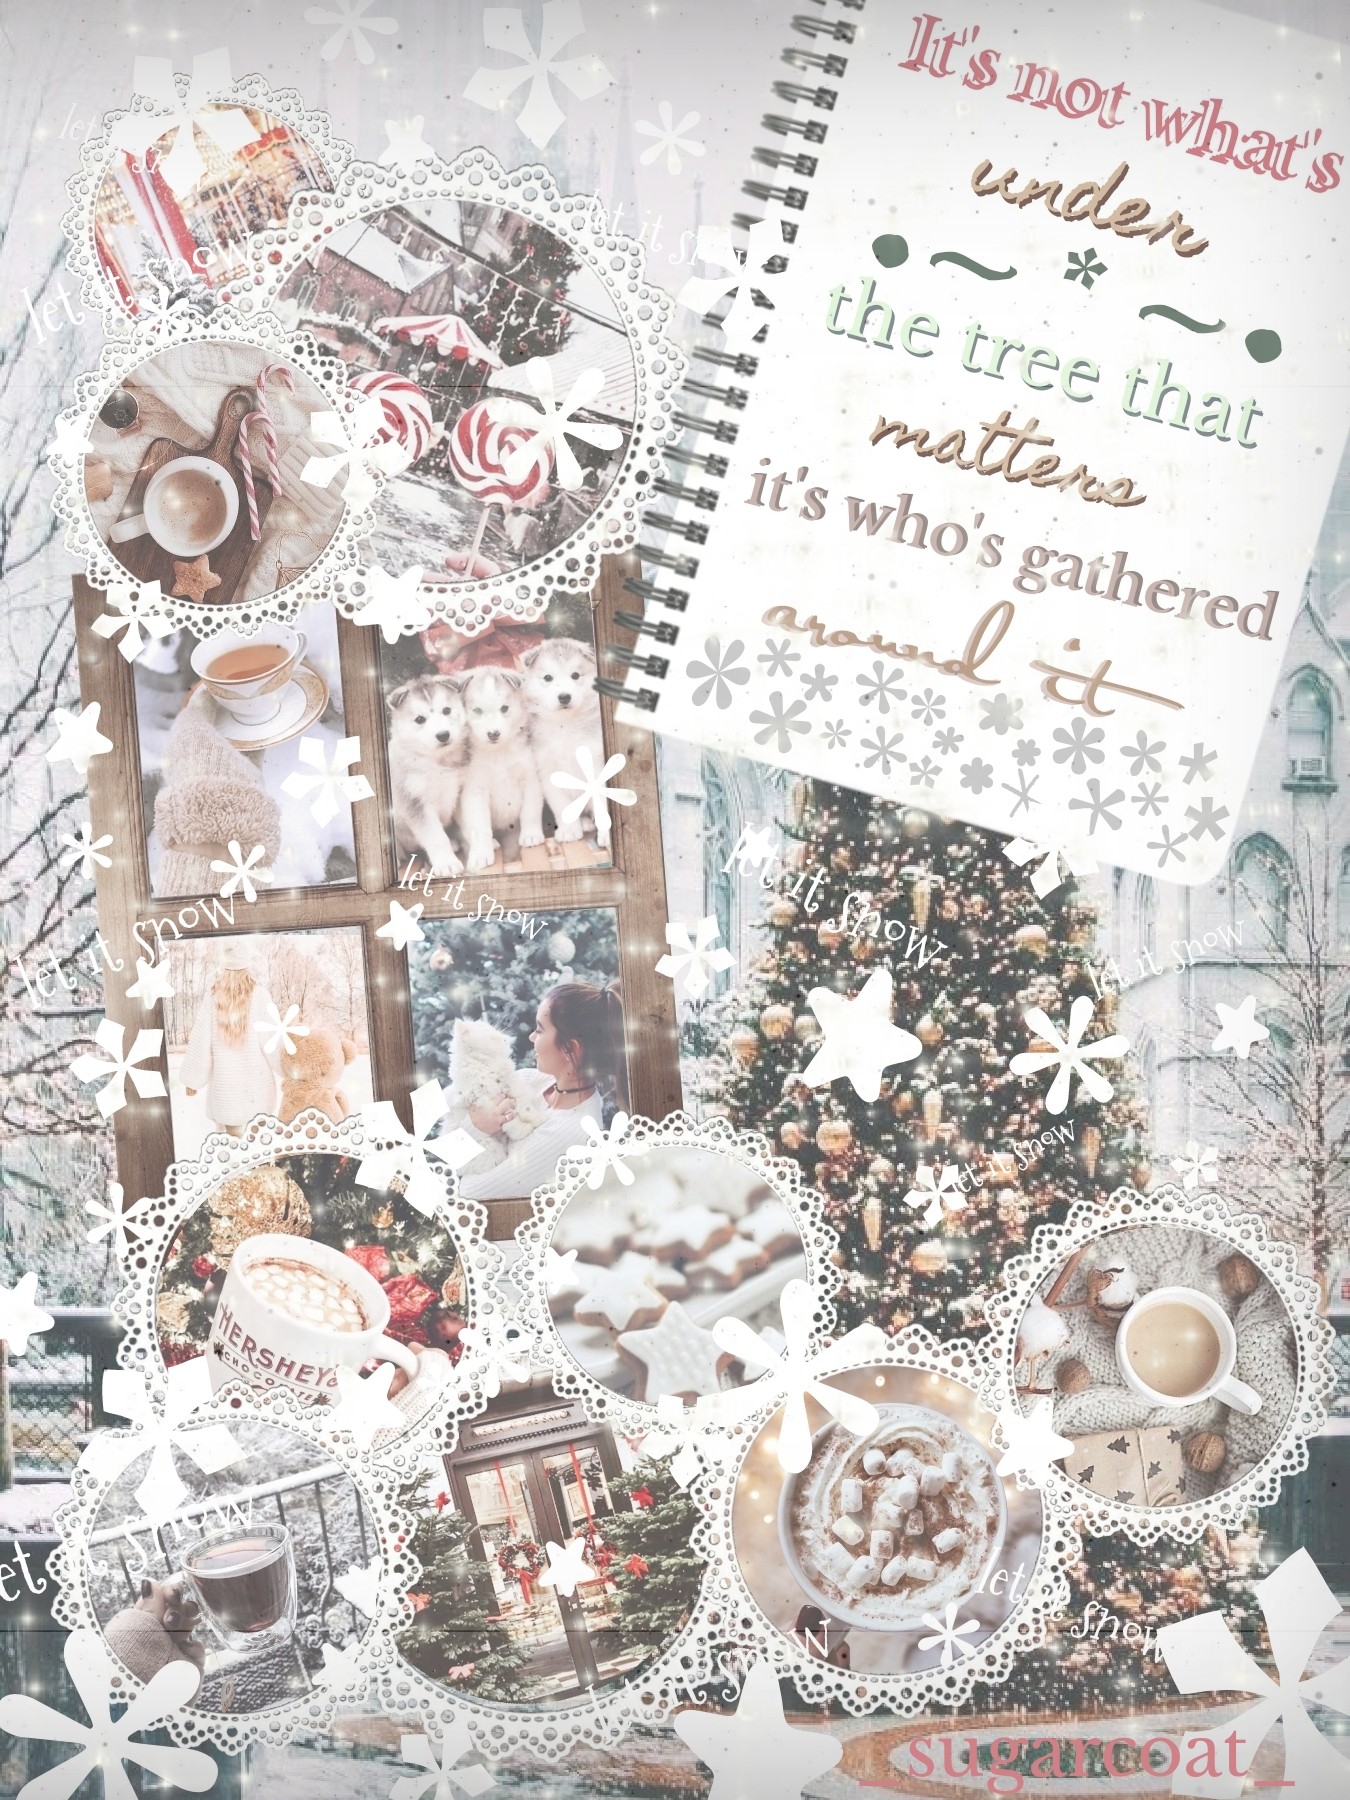 🎄TAP🎄
❤️20-11-22❤️
Hi muffins! New theme is on now. Is too early??? If so sorry 😅 hru? I am doing well! I just finished this. Took me ~2 hrs. I love it ❤️ Qotd: r u ready for the holidays? aotd: Yes🎄 love y'all ❤️❤️❤️